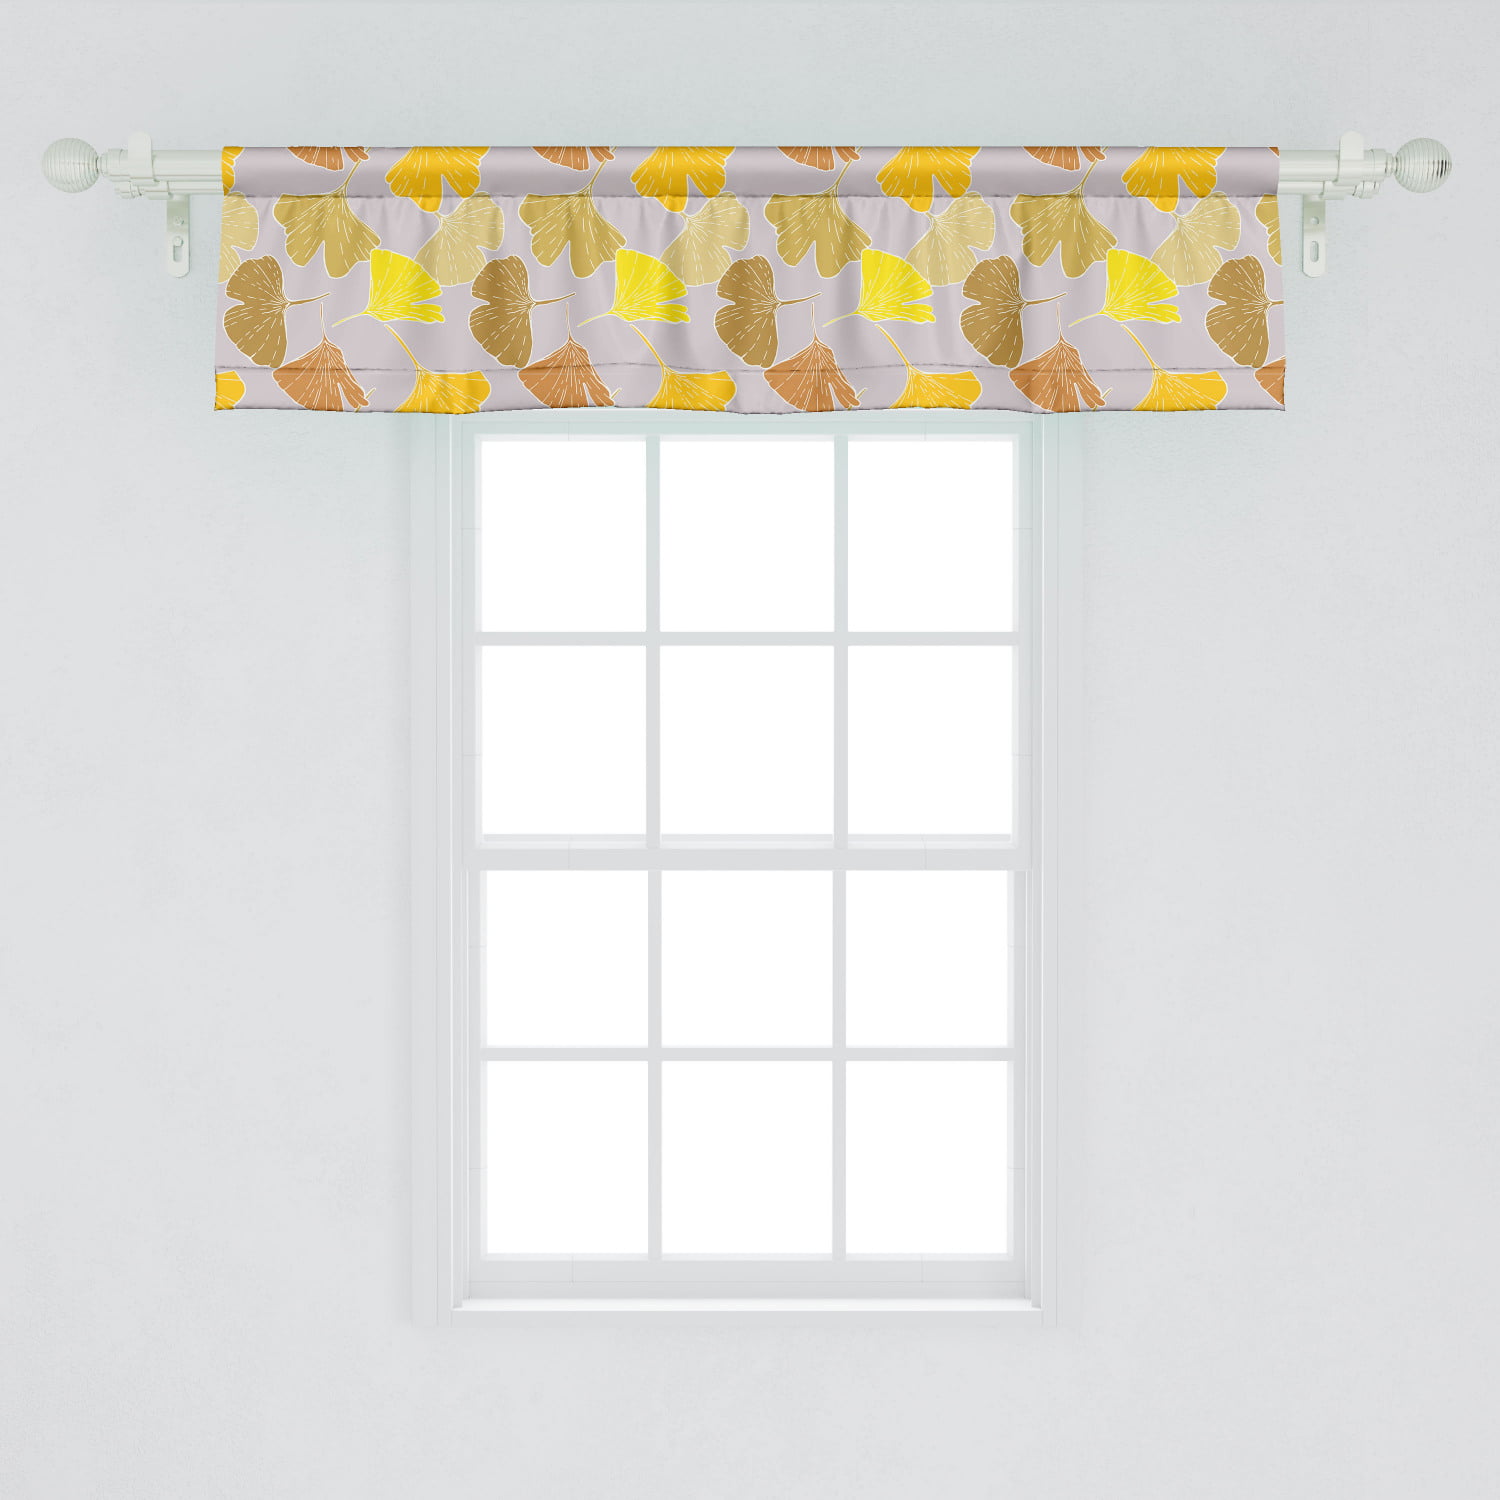 Ambesonne Leaves Window Valance, Hand Drawn Exotic Foliage Ginkgo Leaves  Pattern Forest Woodland Nature Design, Curtain Valance for Kitchen Bedroom  ...